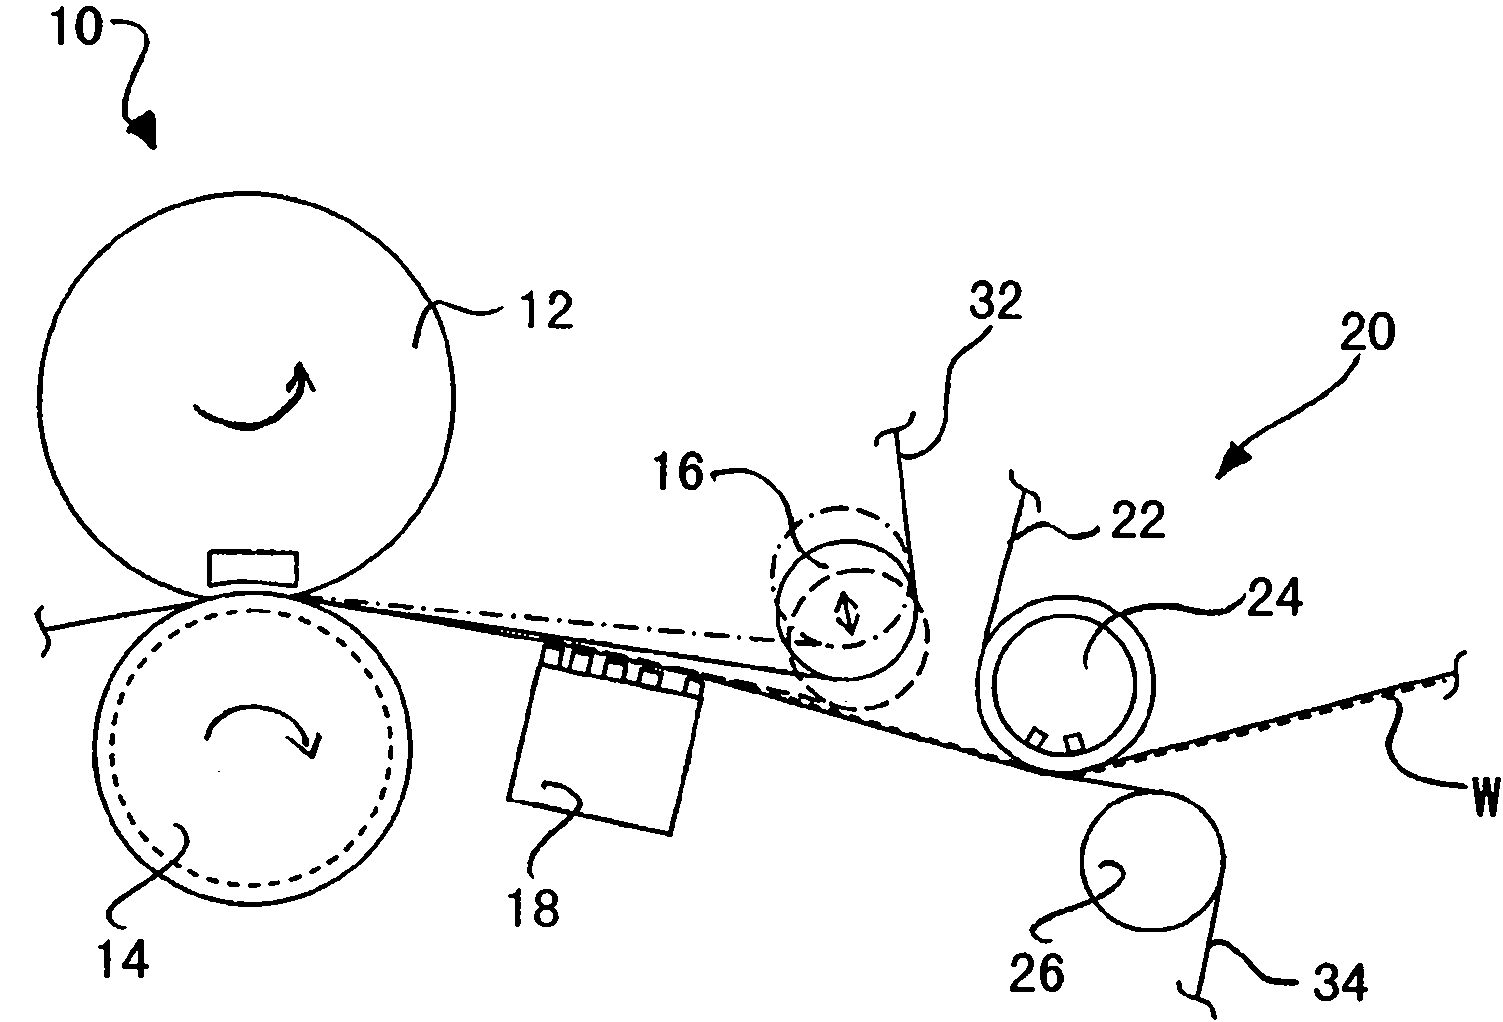 Method and device for transferring a paper web from a supporting woven fabric to another